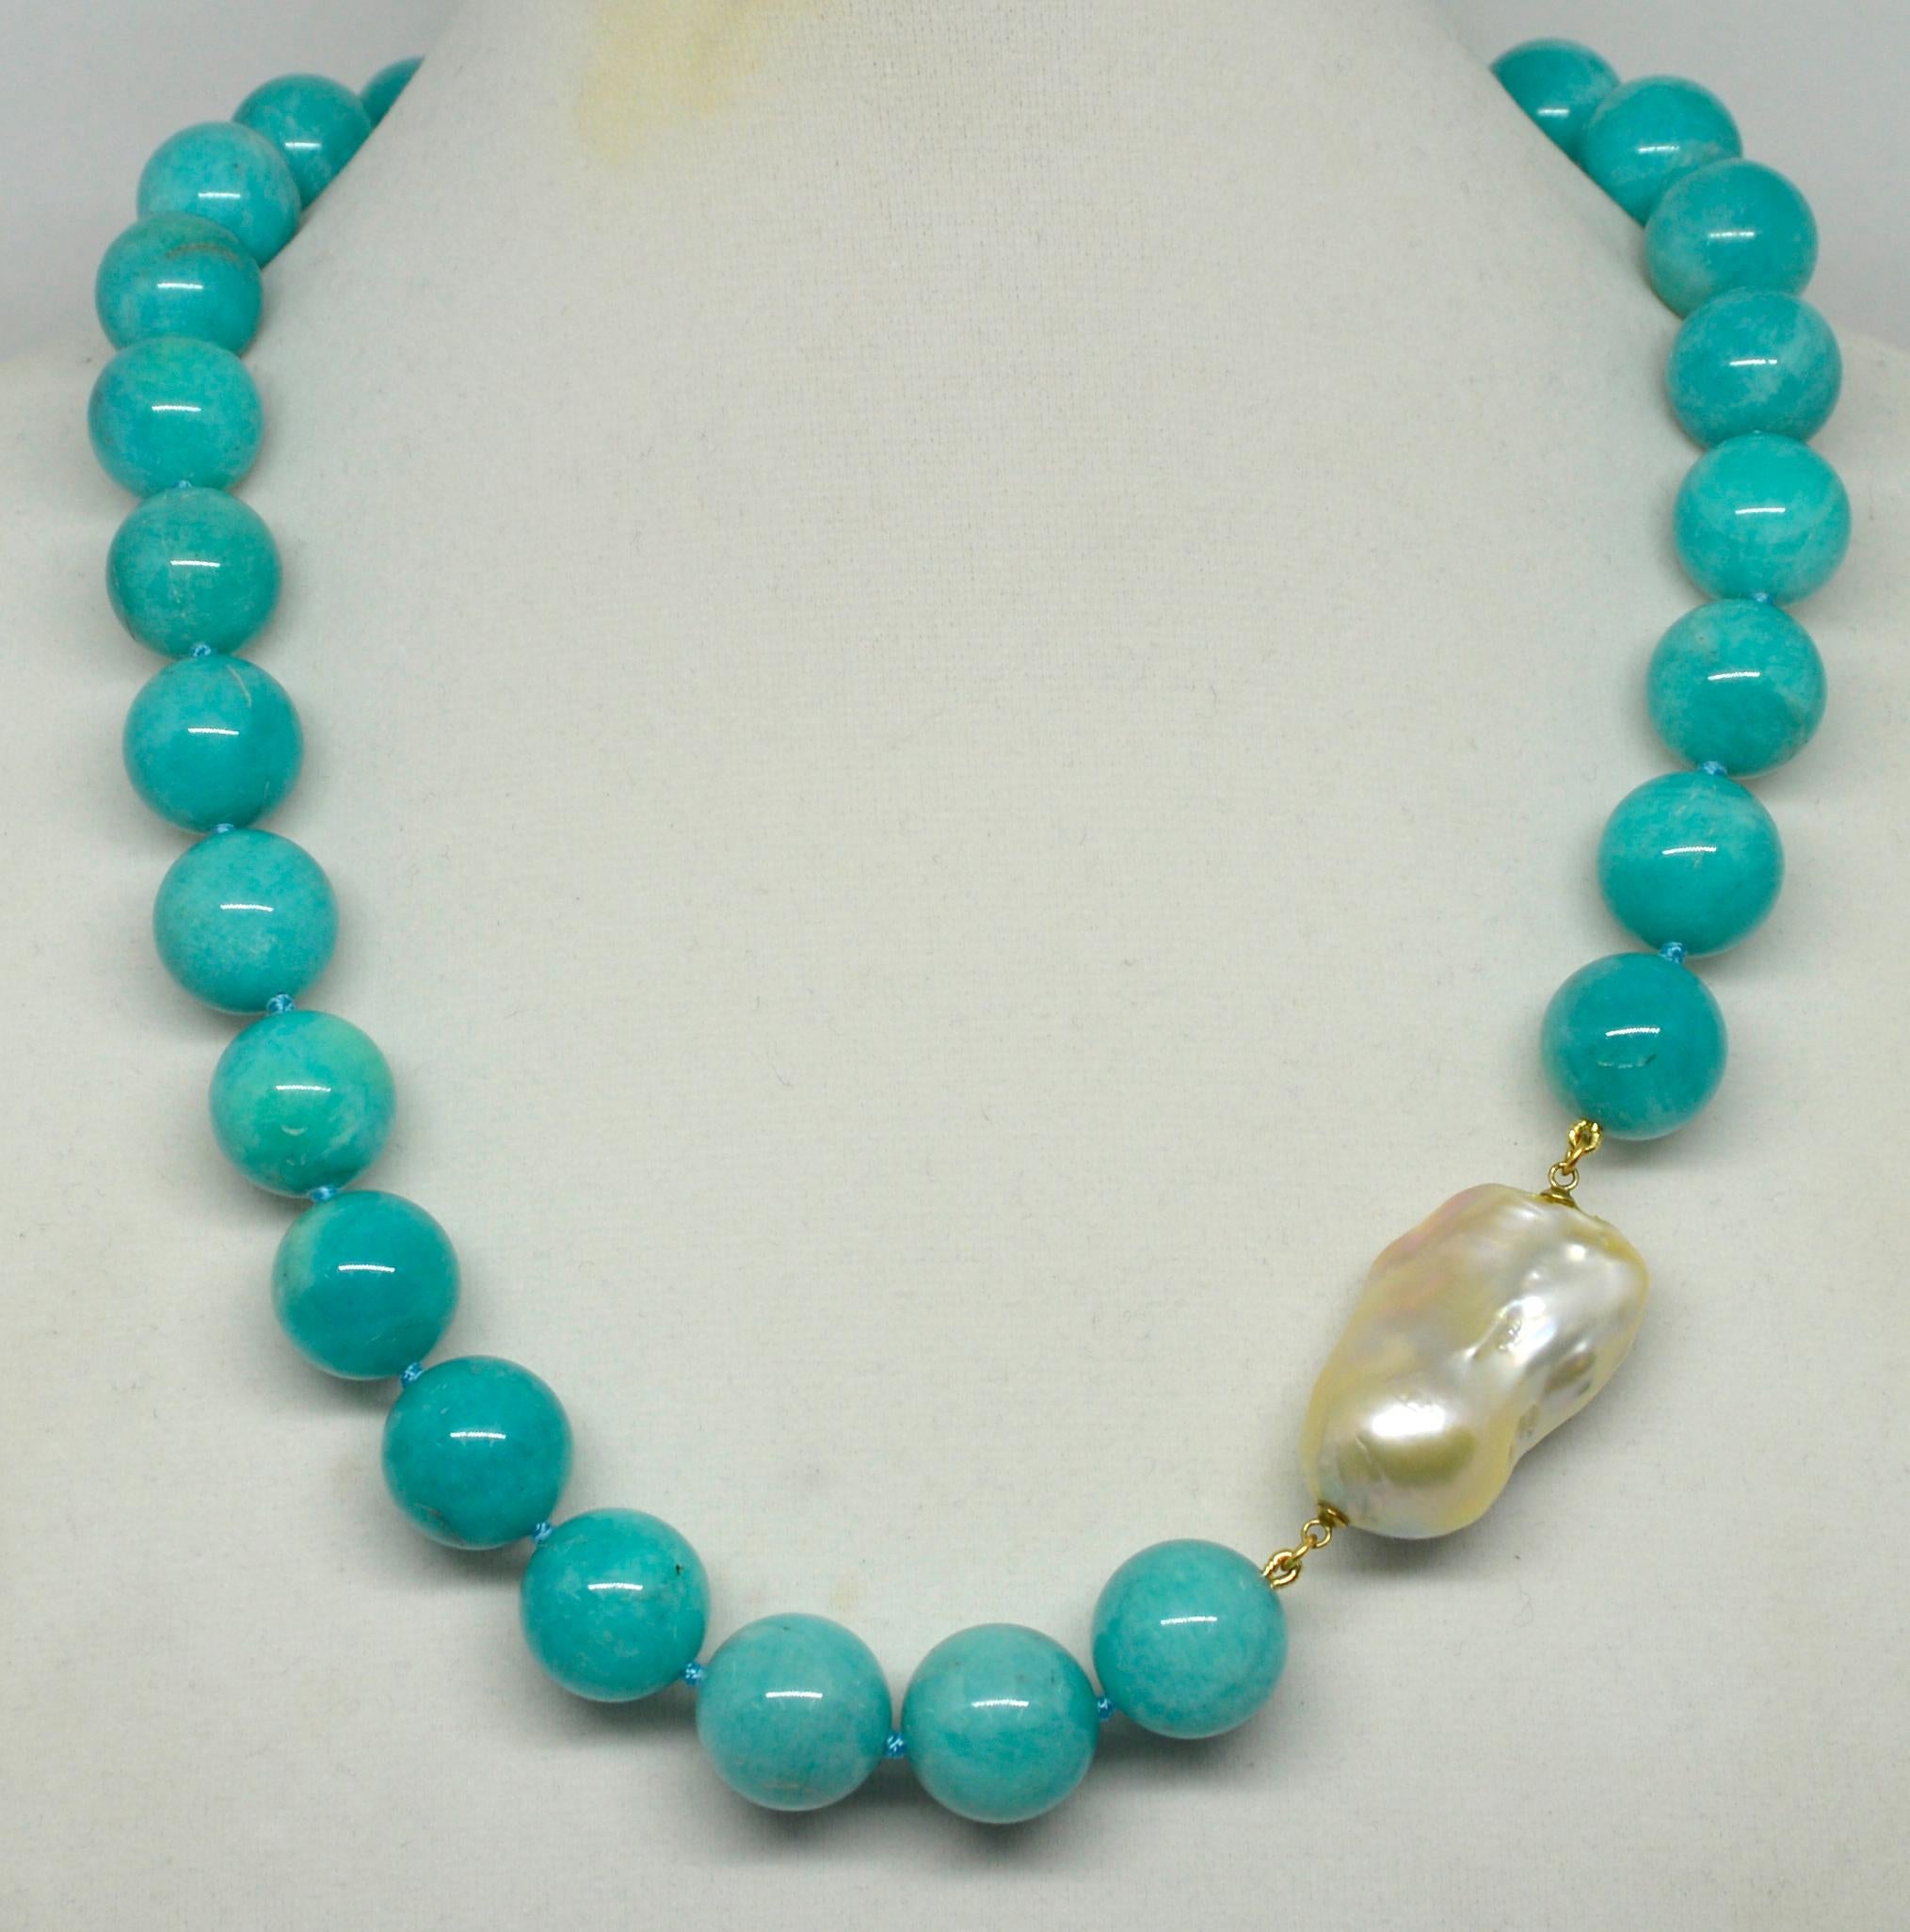 Amazonite Fresh Water Baroque Pearl Necklace

Bold and Beautiful this Vibrant Blue/Turquoise Amazonite Necklace is all Natural from Mother Earth. Necklace has 26 x 16mm Peruvian Round Amazonite, offset with a Fresh Water Baroque Pearl 34x16mm